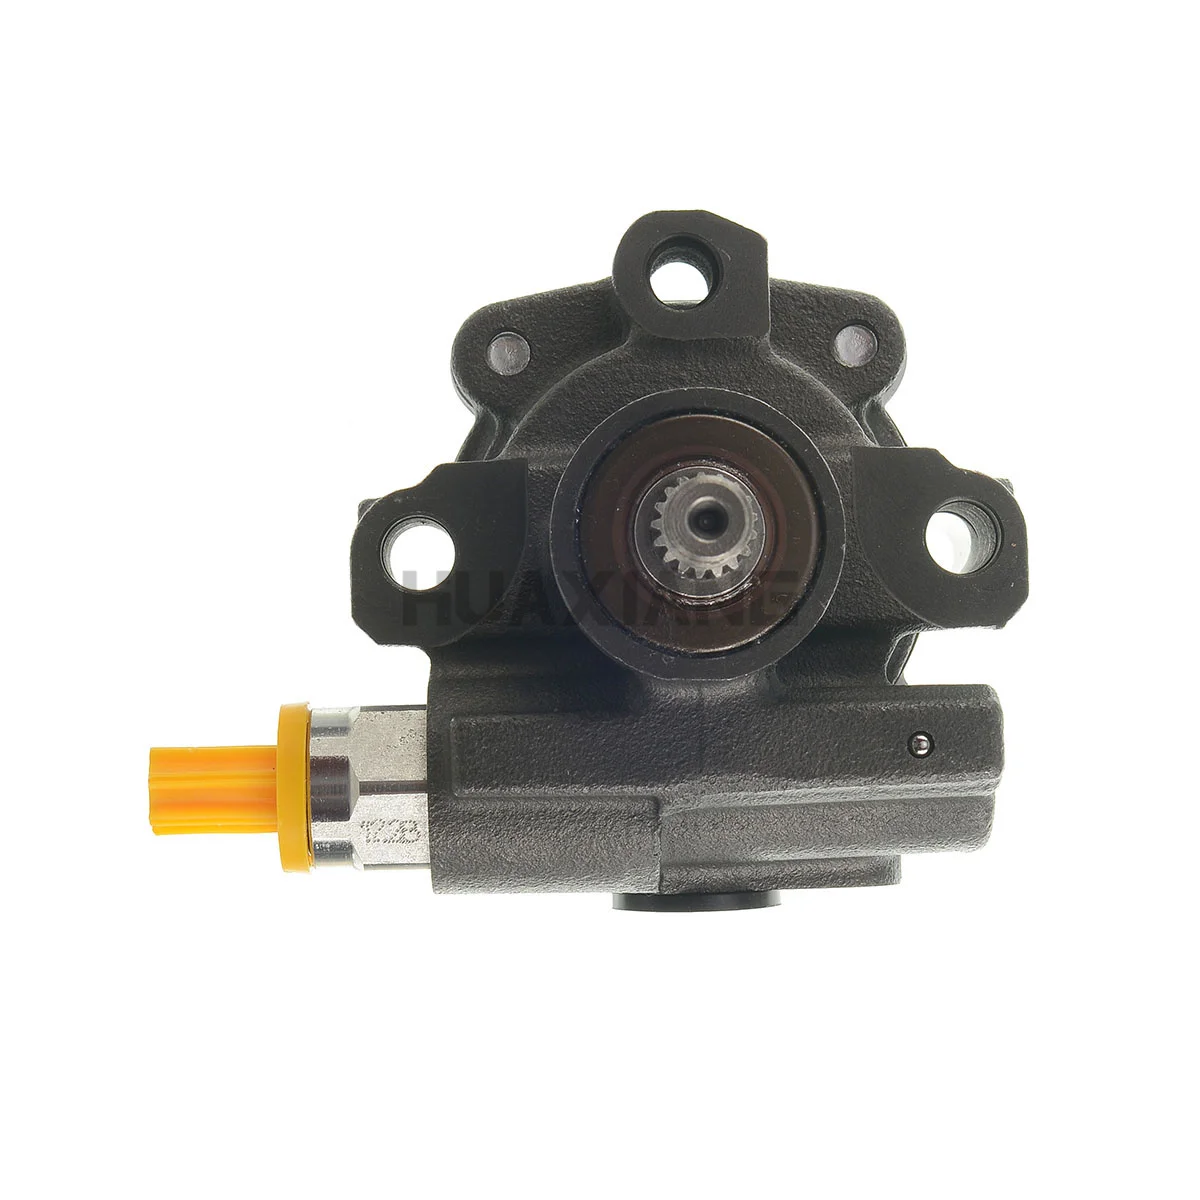 

CN US CA Power Steering Pump without Pulley for Lexus ES300 ES330 Toyota Camry V6 3.0L 3.3L 44320-33140